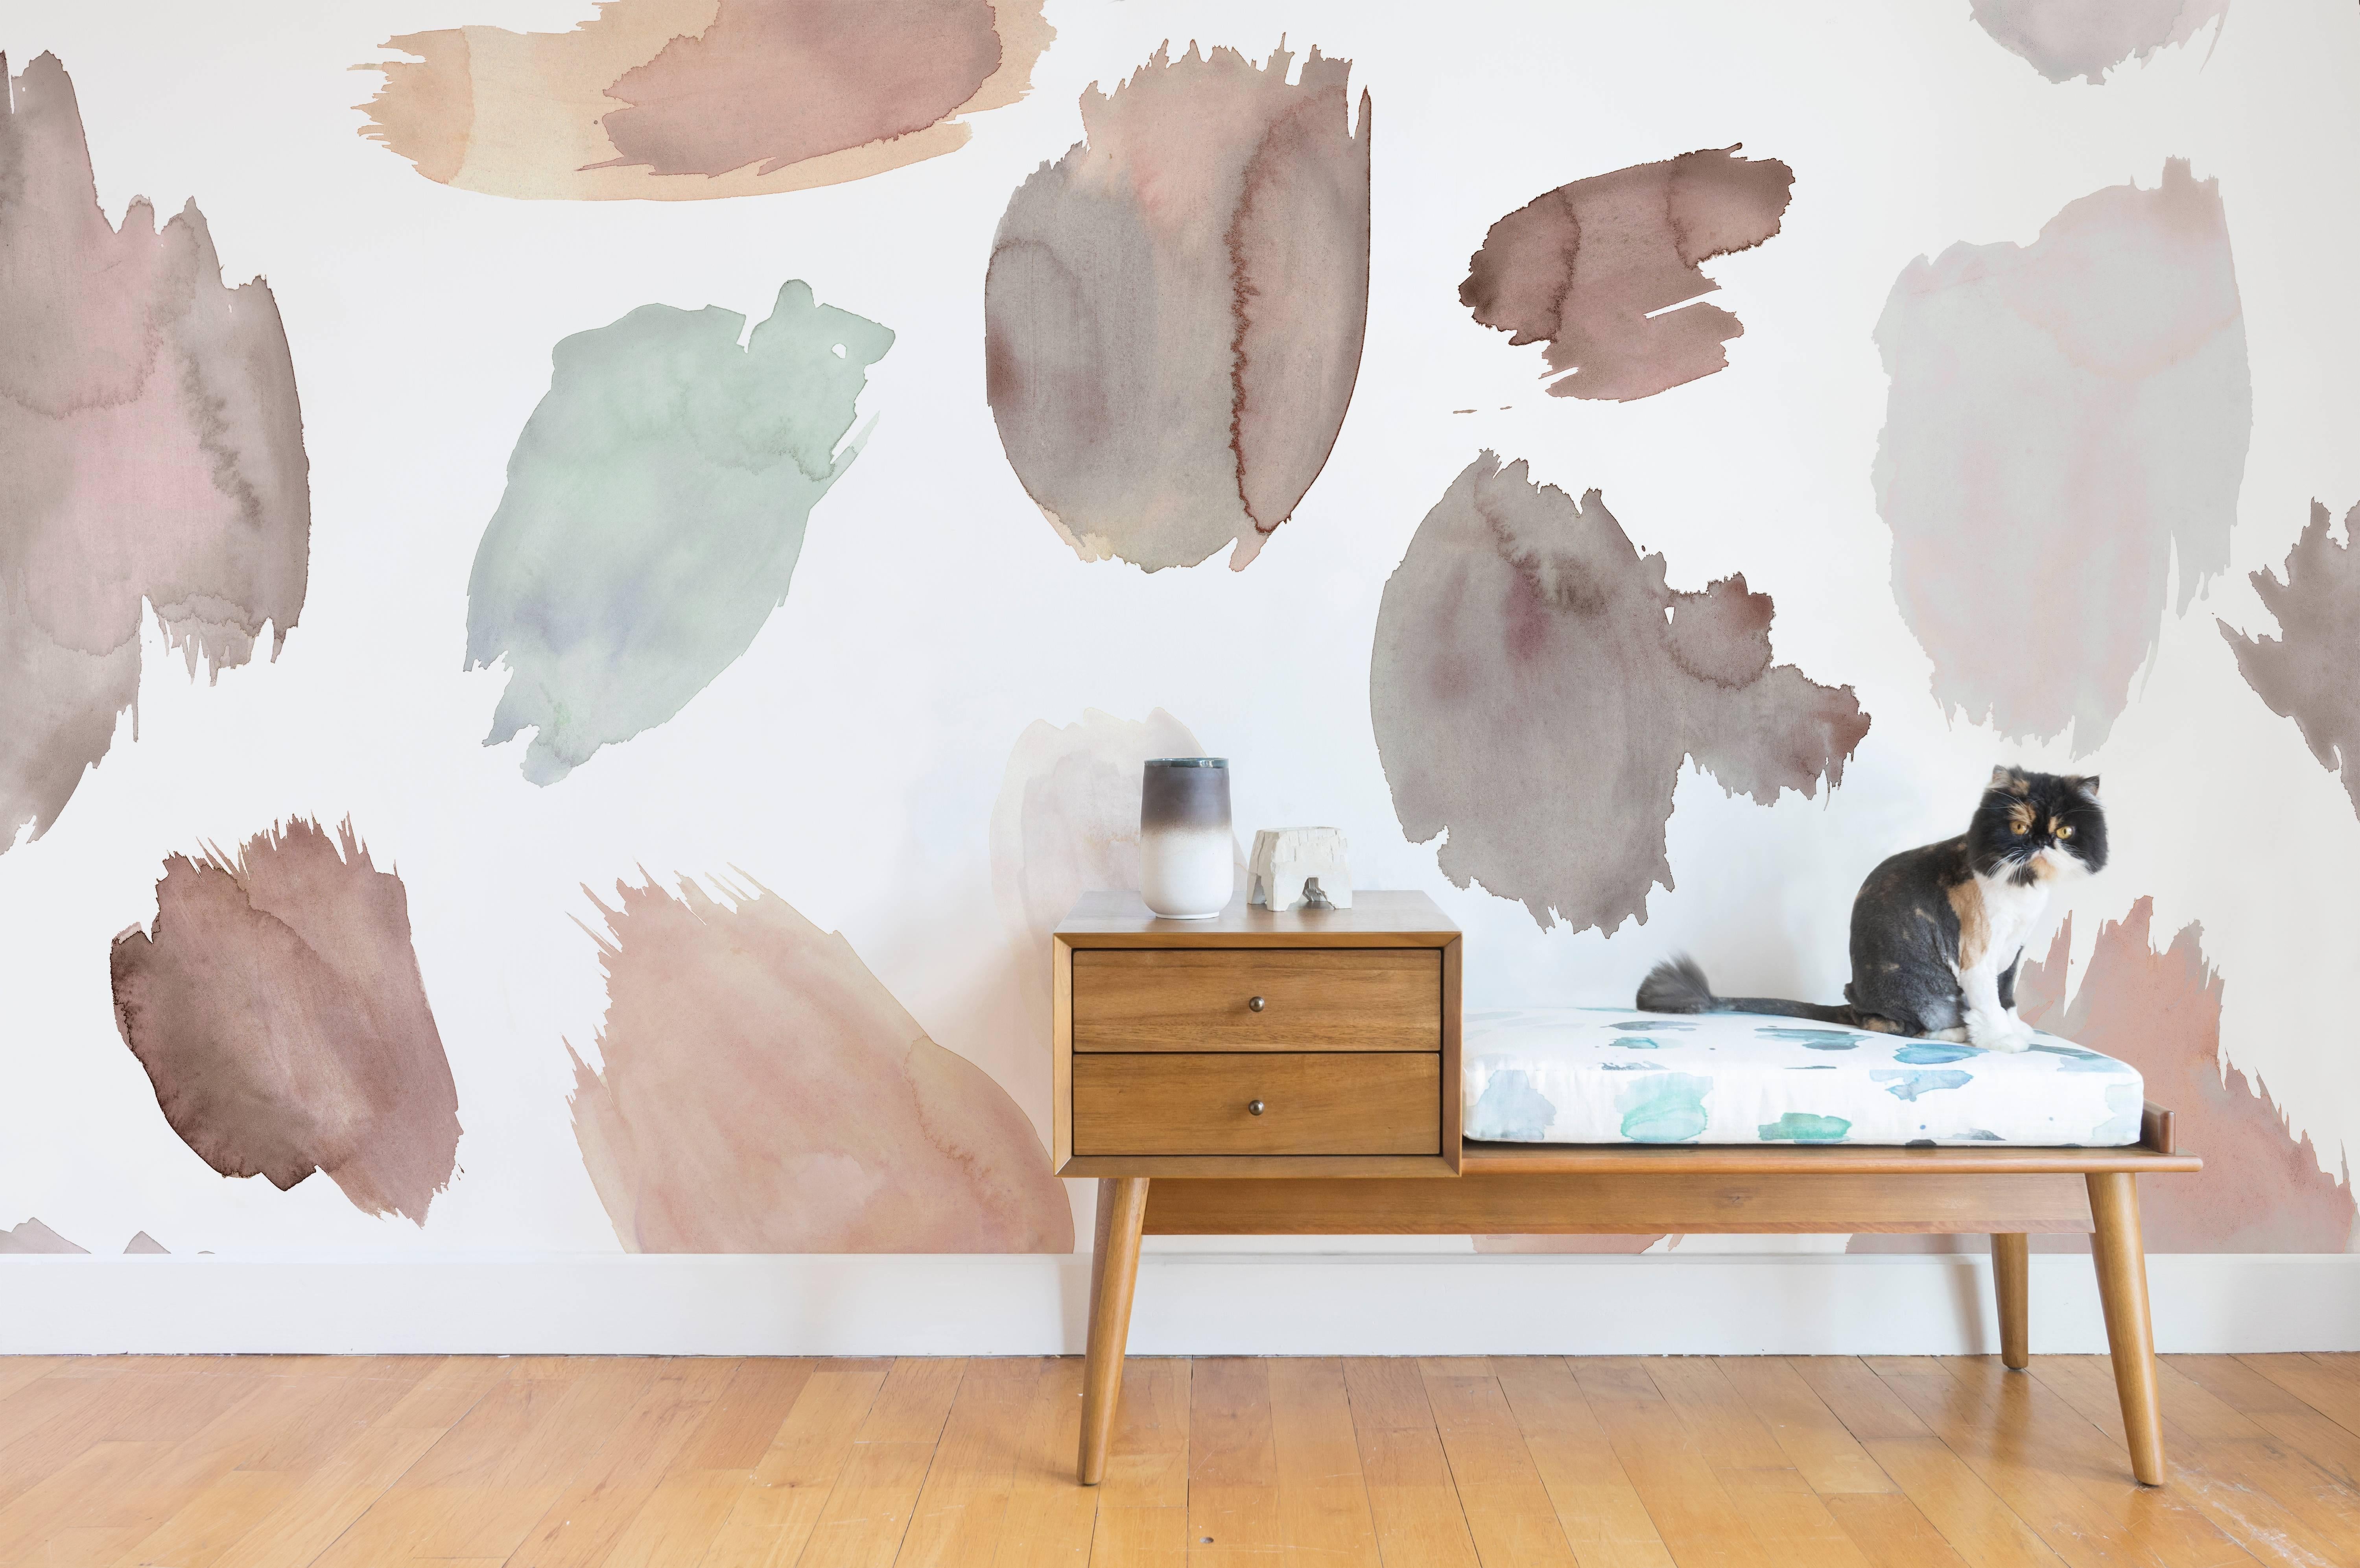 All of our wallpapers are priced by the square foot and are non-repeating custom murals. As a result, each order is laid out and printed to fit the exact dimensions of your wall. The Palette Collection is printed on a commercial grade matte